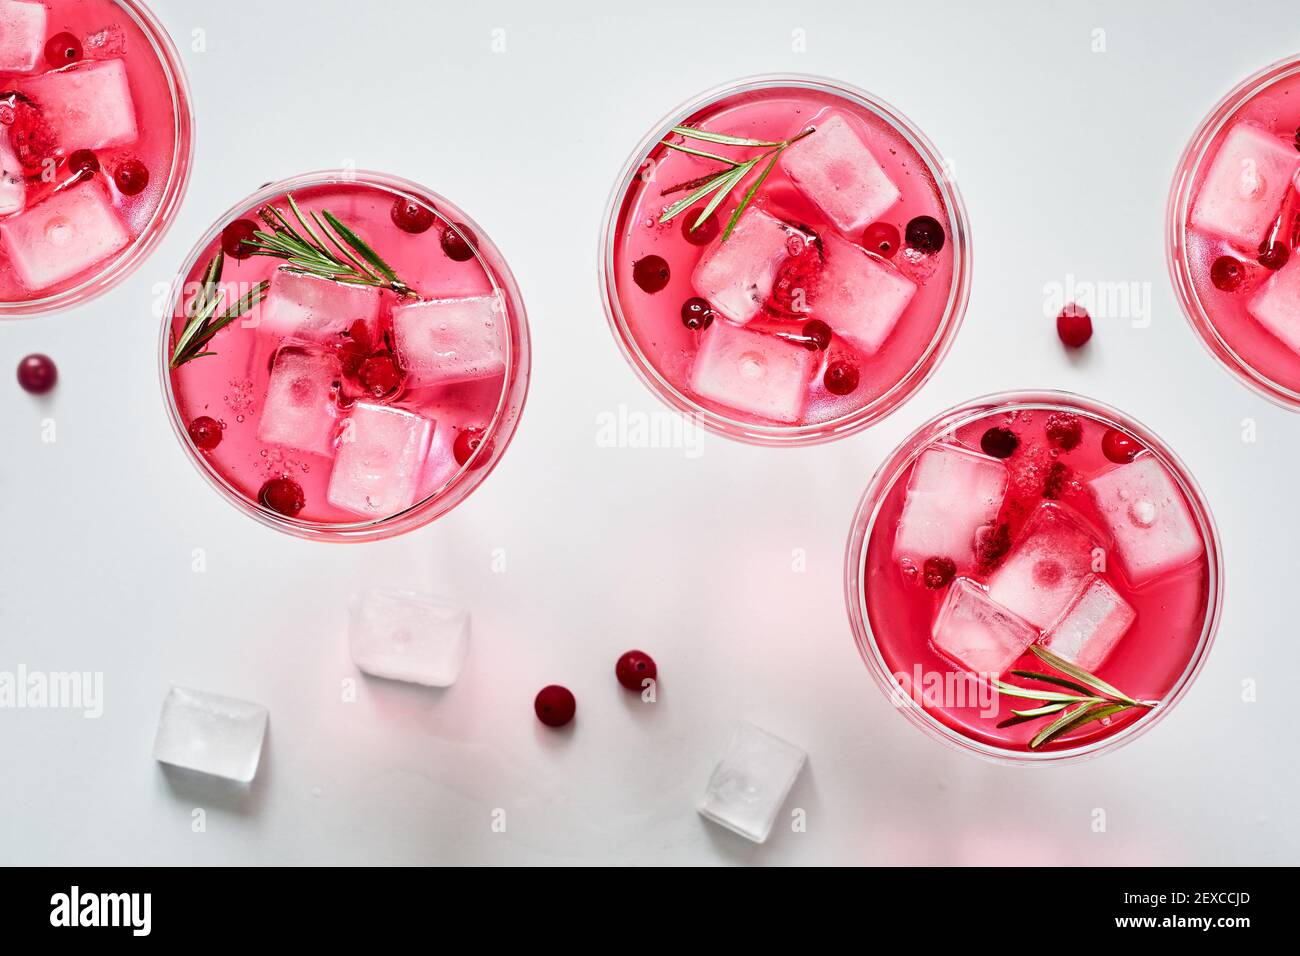 Cranberry rosemary spritzer drink on a light background. Stock Photo